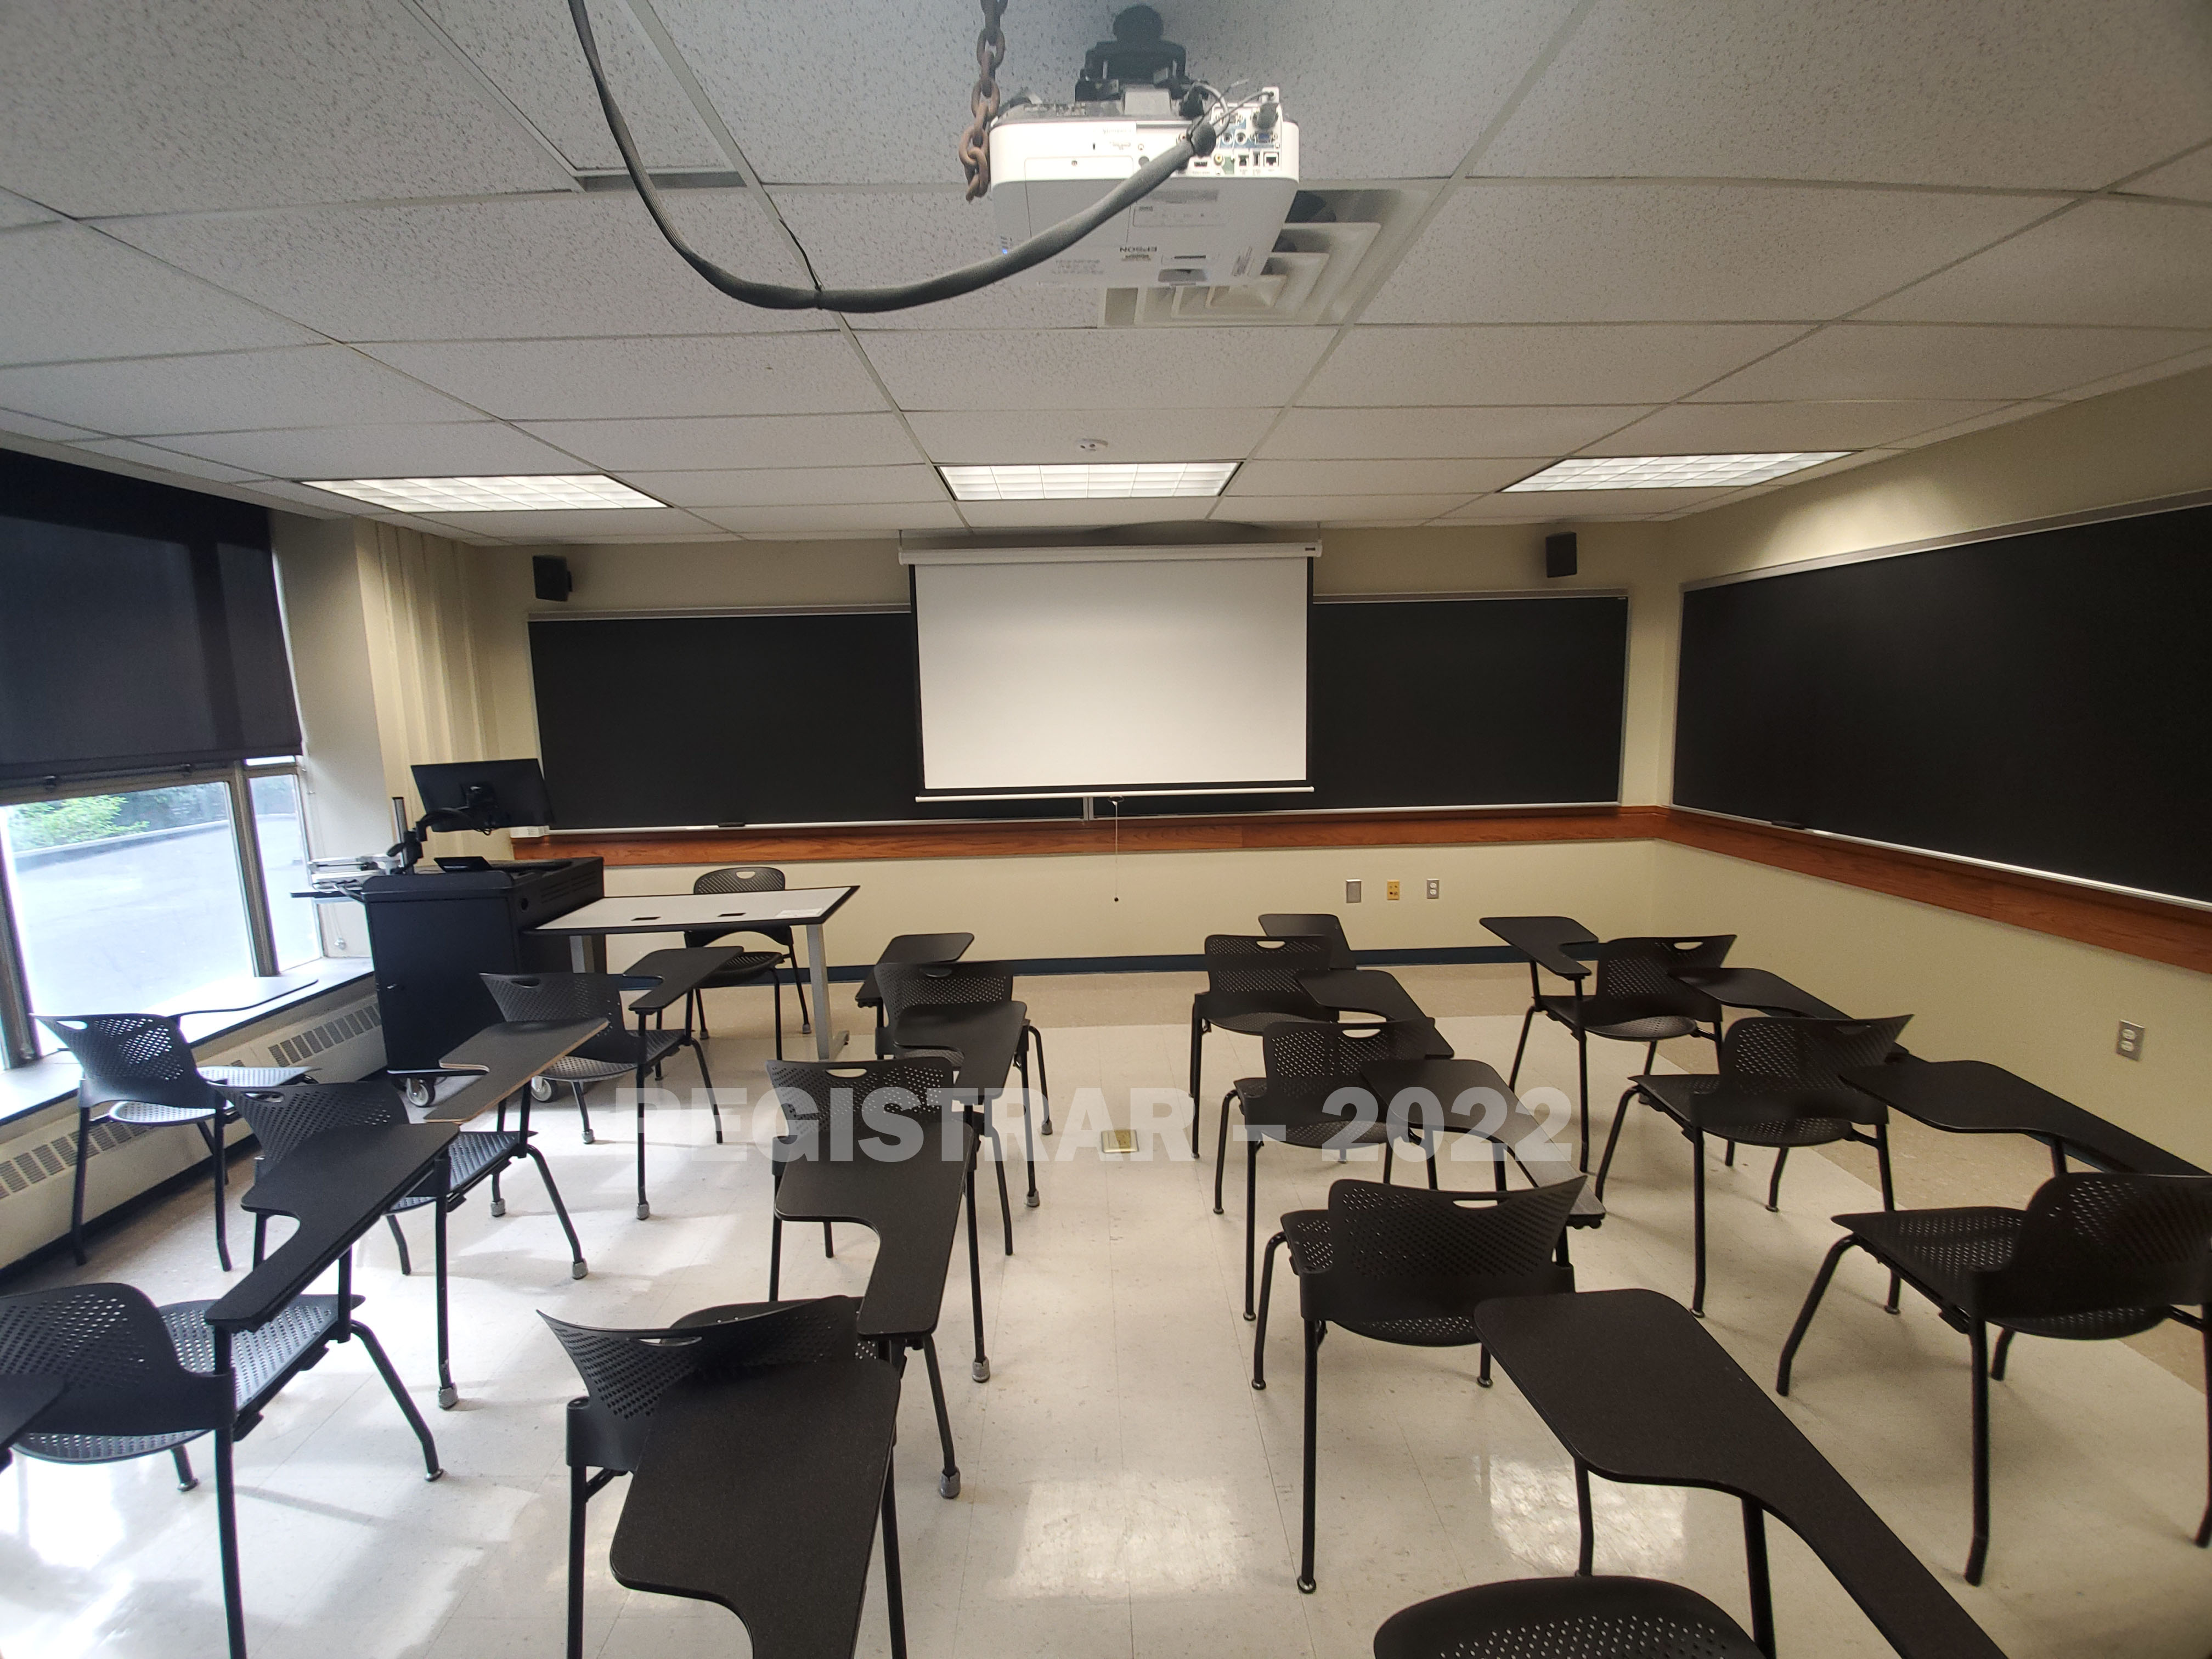 Enarson Classroom Building room 204 ultra wide angle view from the back of the room with projector screen down